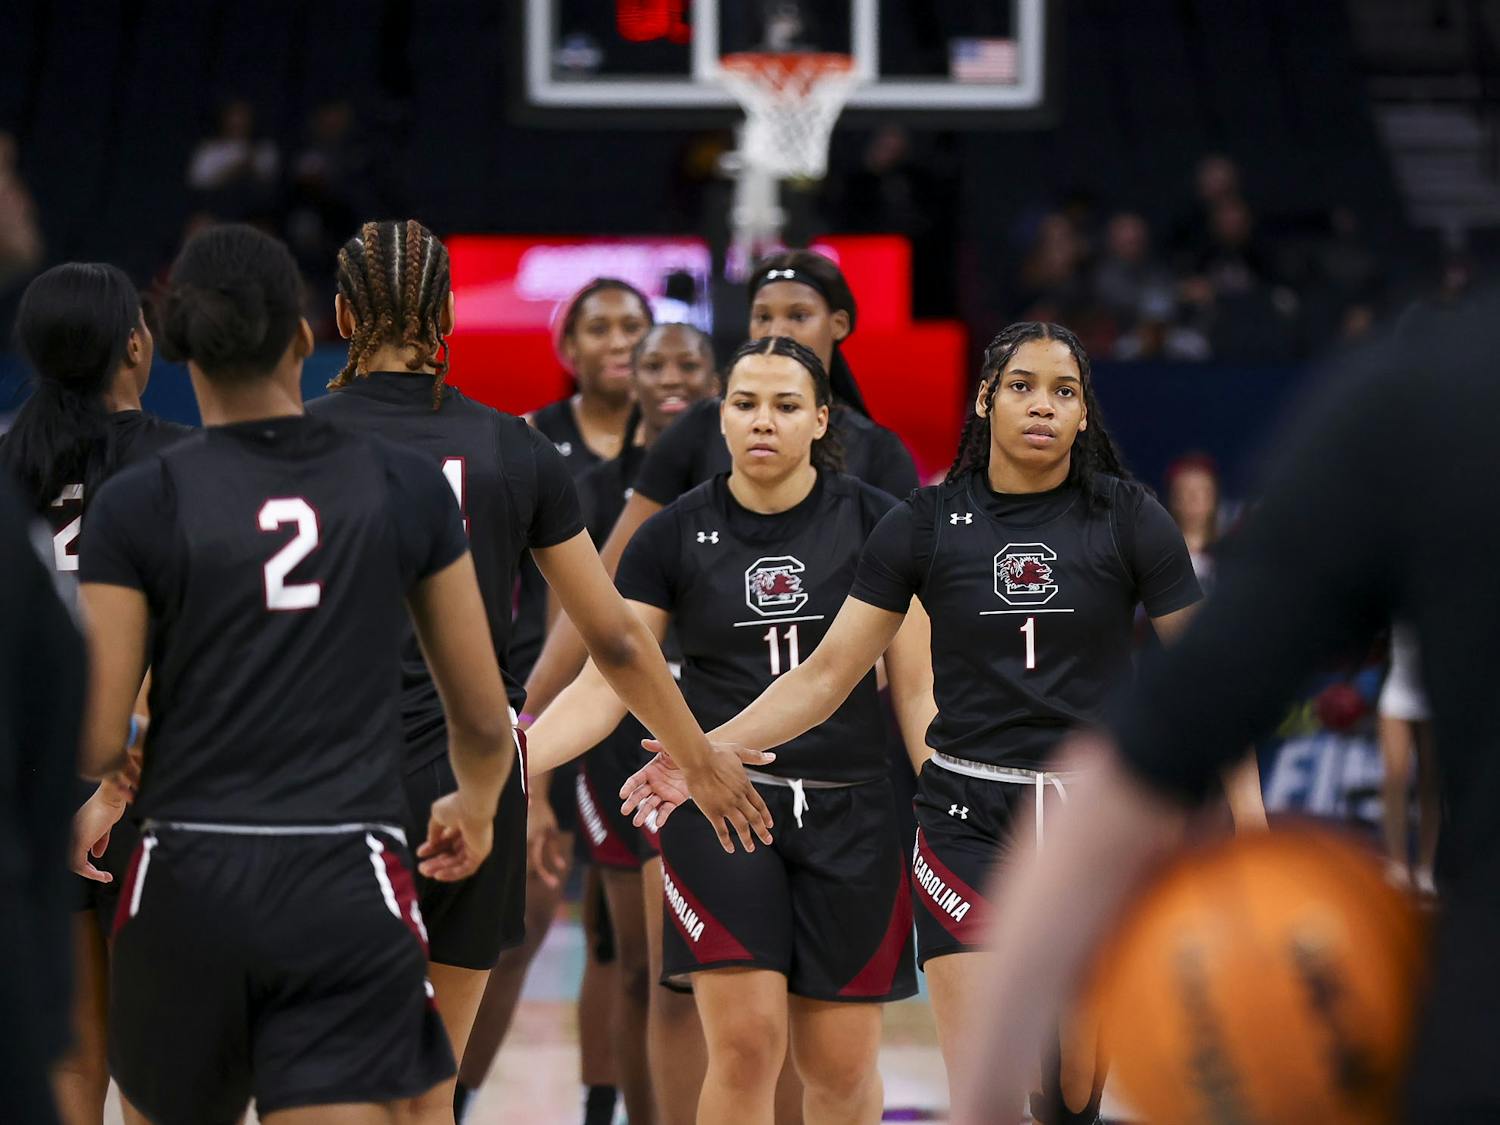 South Carolina womens basketball team practices shooting during open practice in the Target Center on April 2, 2022.